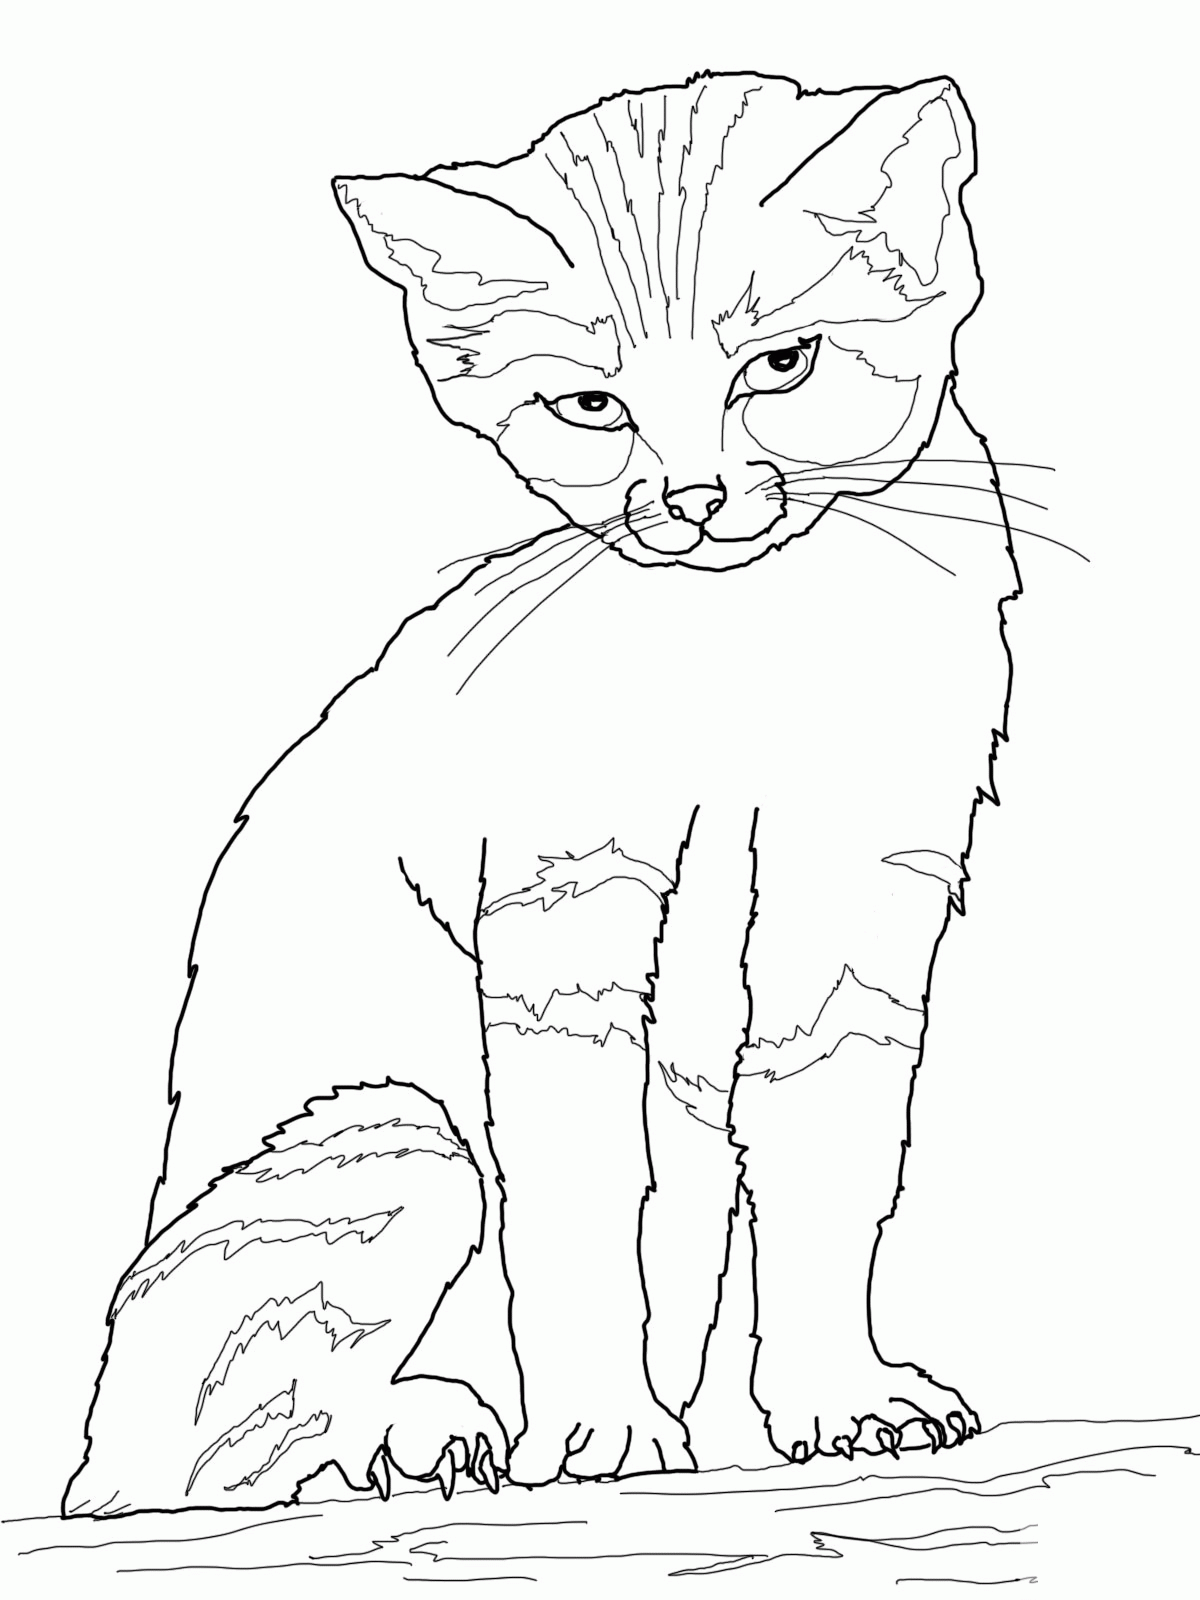 Black Cat Coloring Pages To Print - Coloring Pages For All Ages